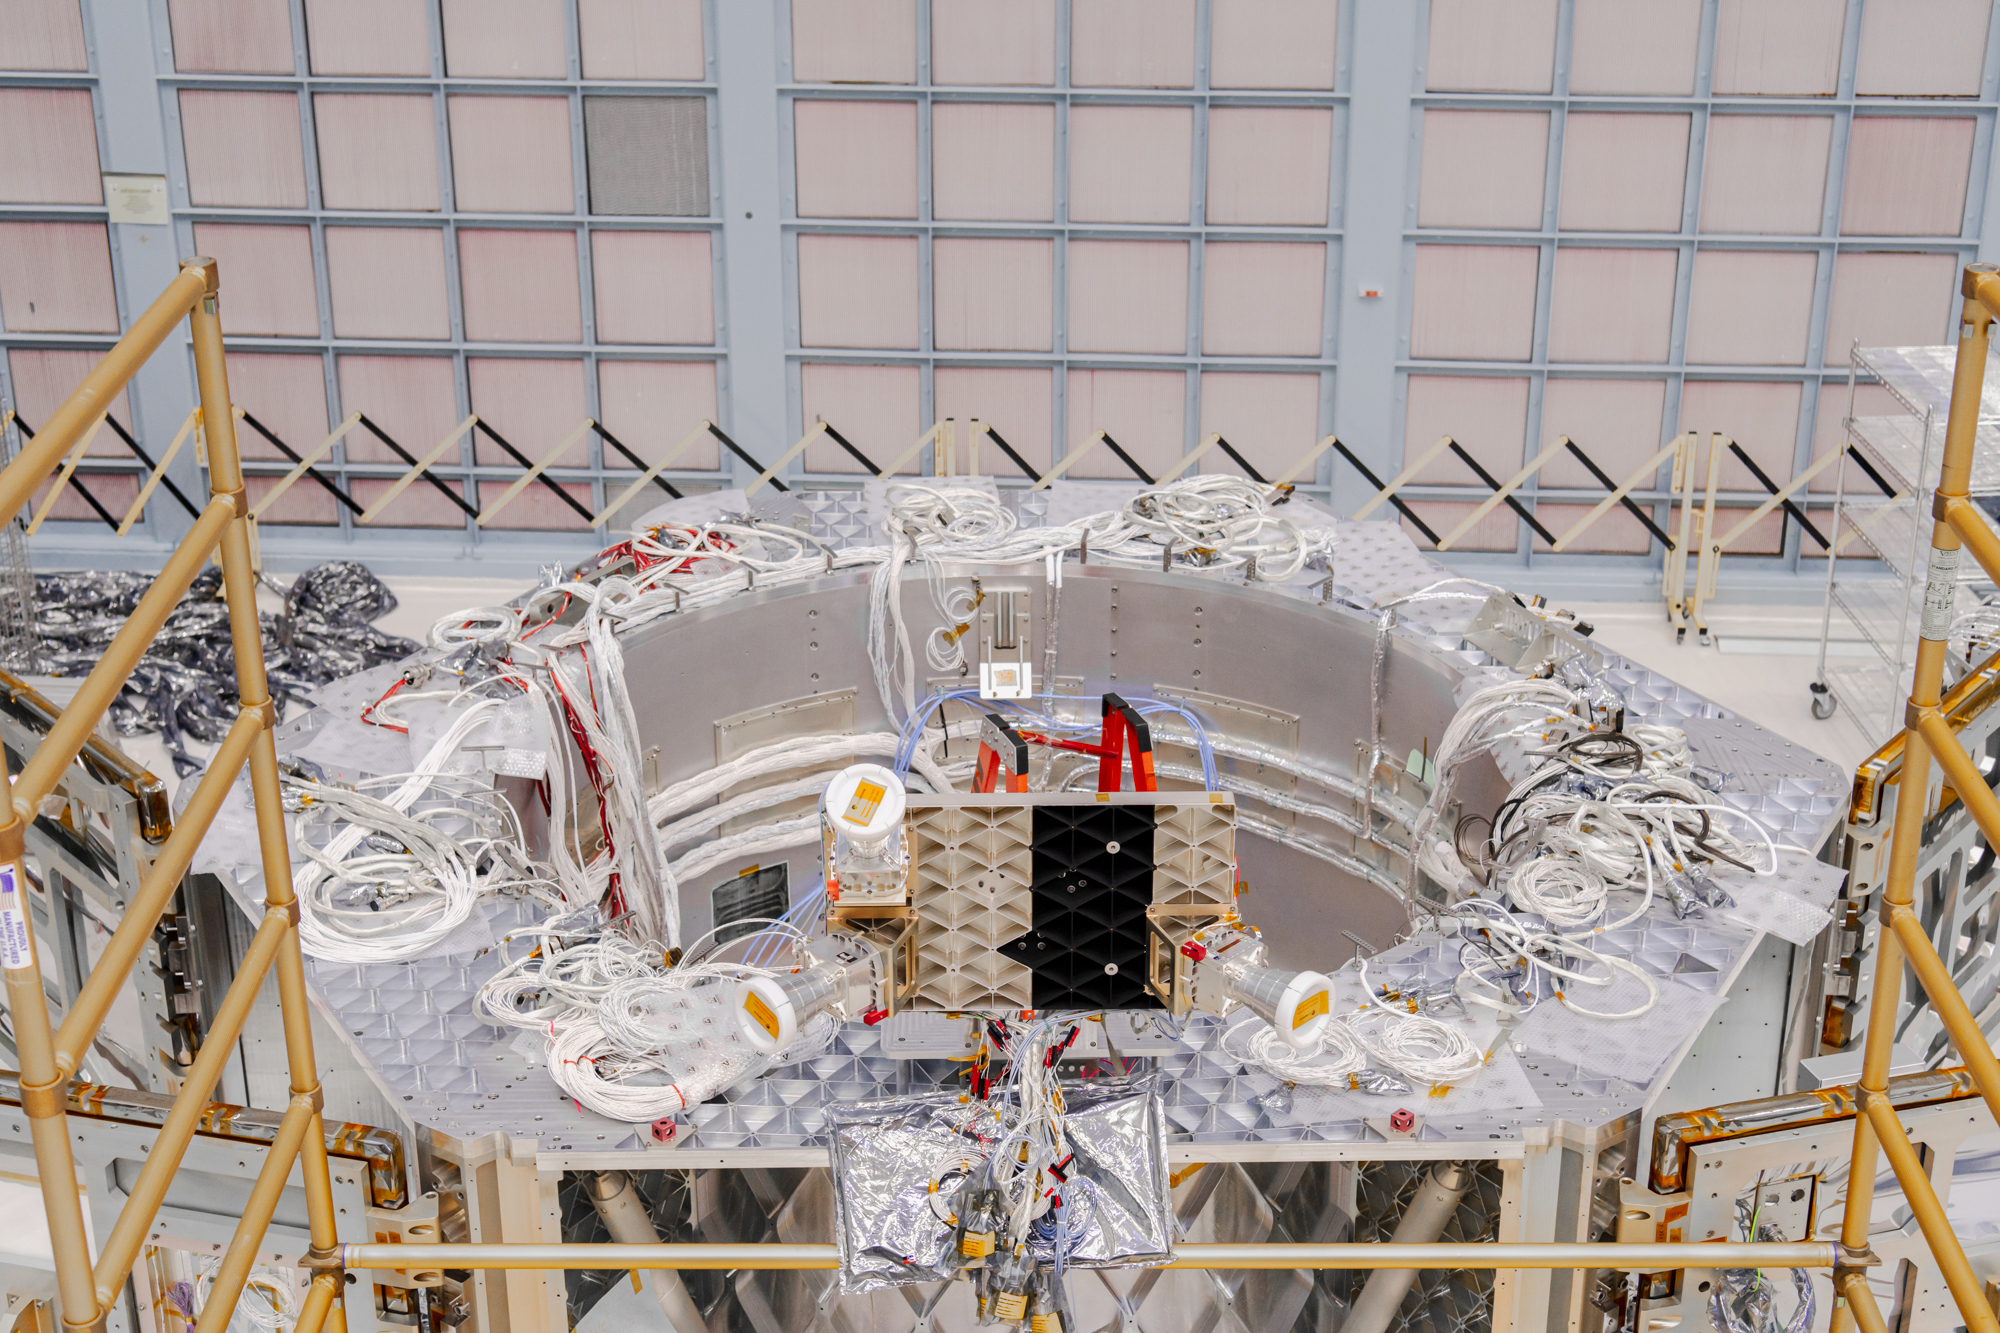 Top-down view of a large silver hexagonal-shaped structure with a circular opening inside. Tons of white wires are bunched on top of the structure. In the foreground is a large square box with three white horn-shaped instruments around it. The back wall is covered in a grid of light pink squares, which are air filters. Photo credit: NASA/ Sydney Rohde